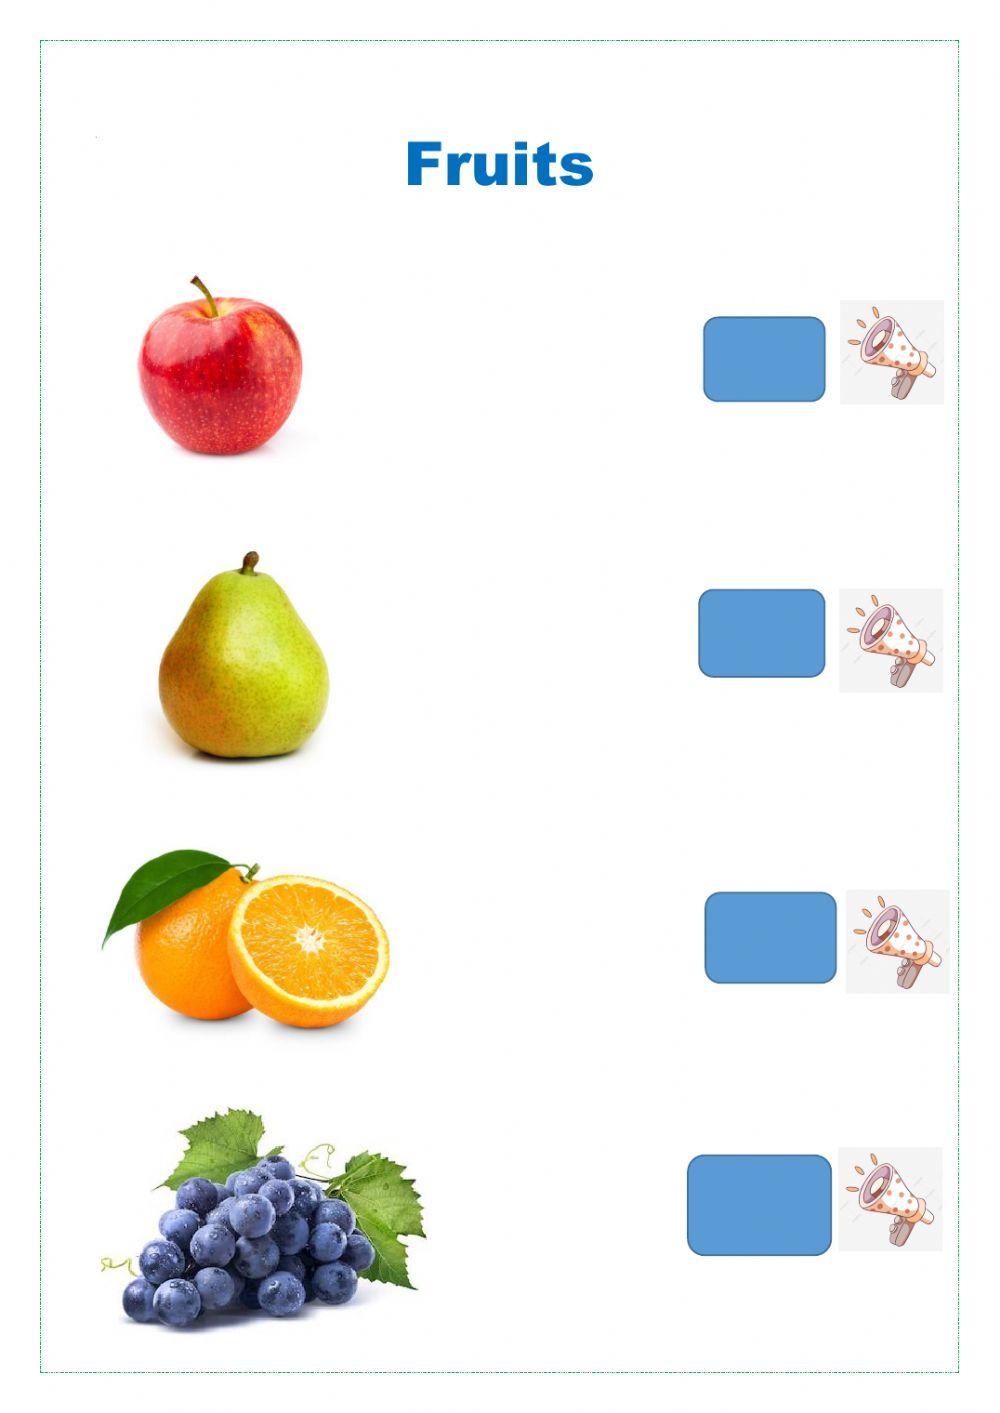 Fruits,vegetables and food